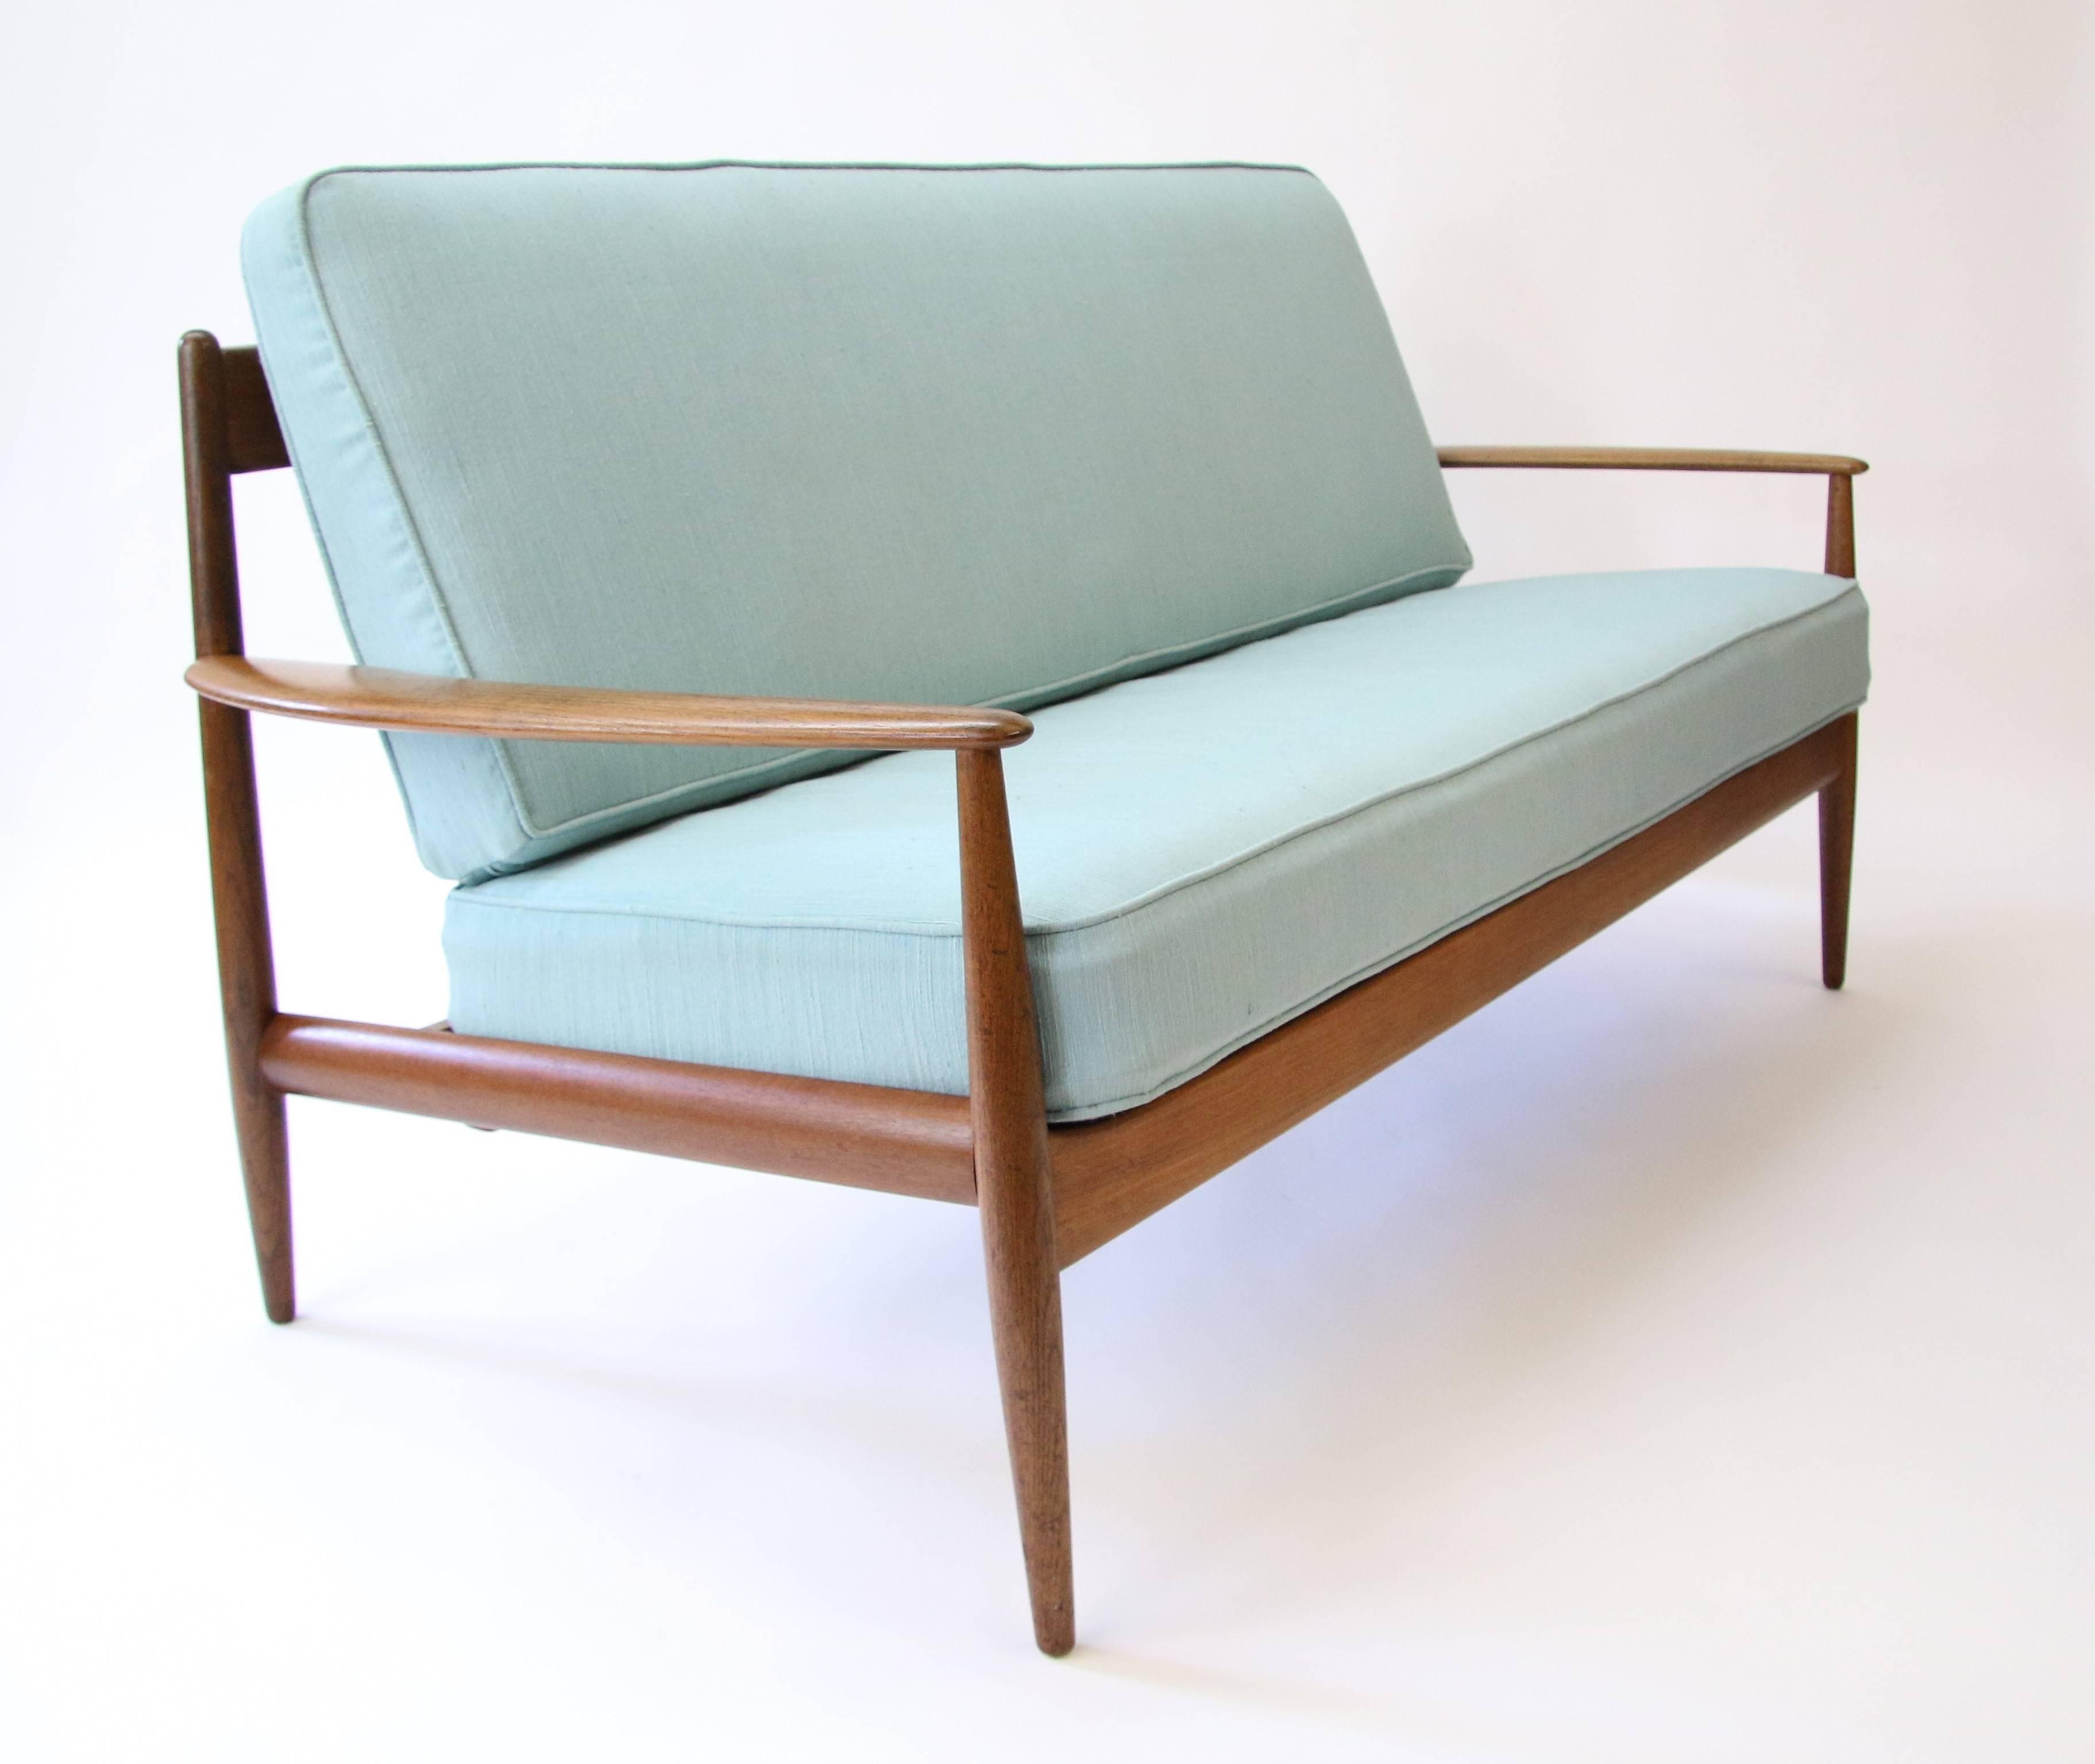 This is an early solid teak loveseat o rsette by Grete Jalk for France and Daverkosen. Excellent original condition including the original seafoam green fabric. This sofa is a one owner sofa. It has not been restored and yet shows incredibly well.